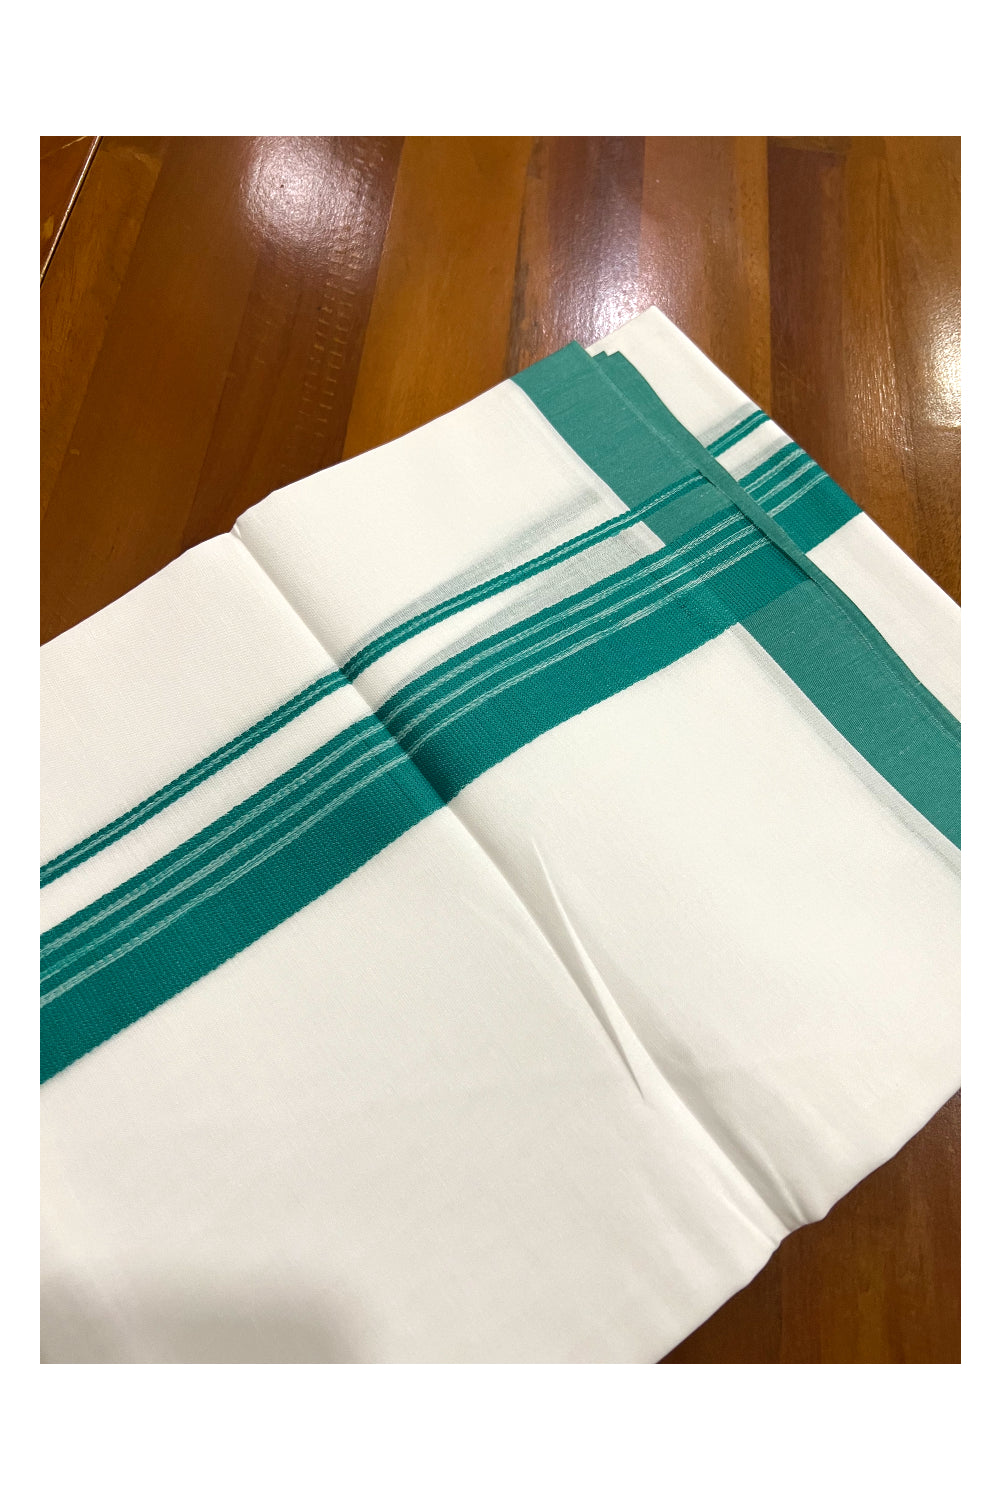 Pure White Cotton Double Mundu with Green Border (South Indian Dhoti)